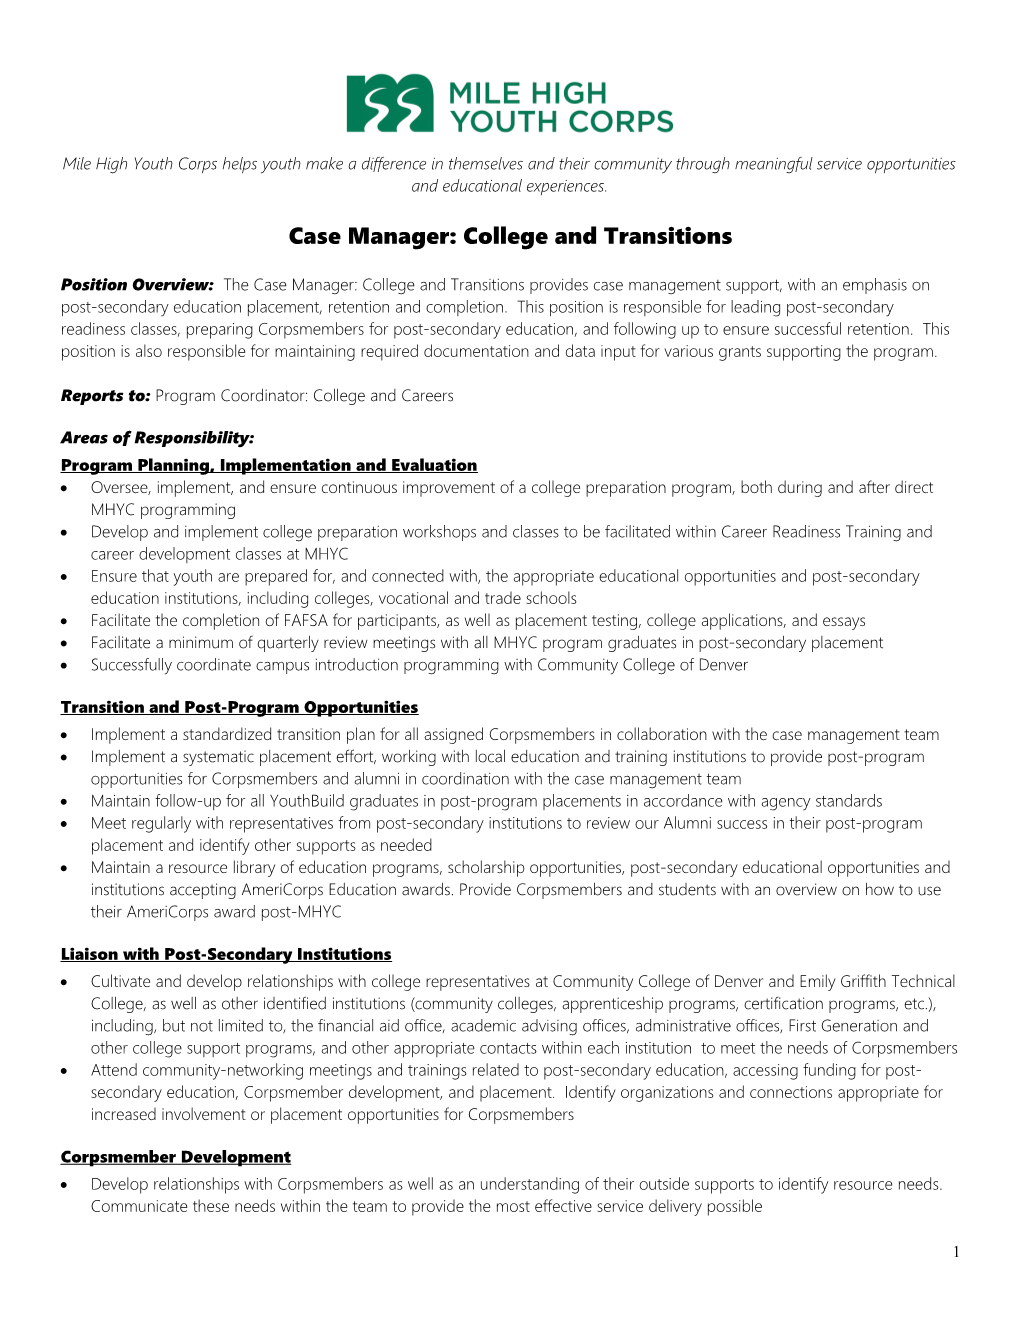 Case Manager: College and Transitions